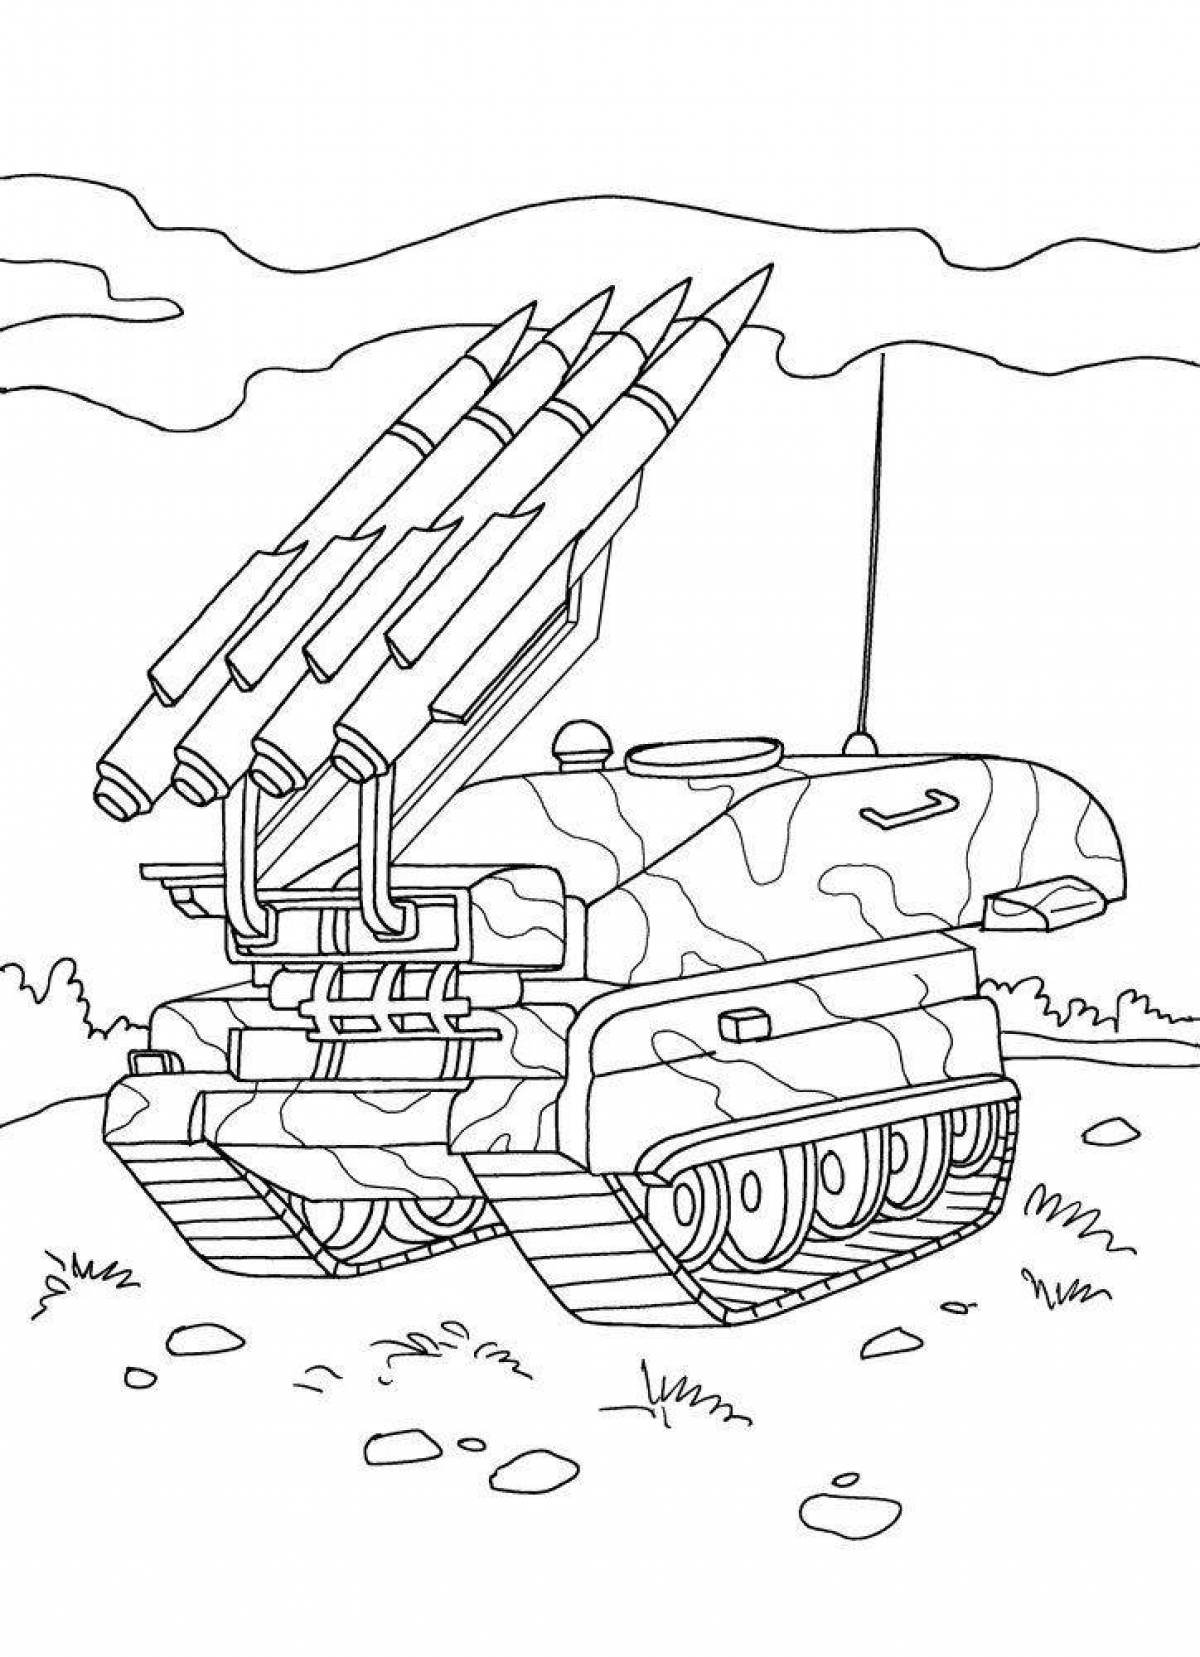 Coloring creative Russian military equipment